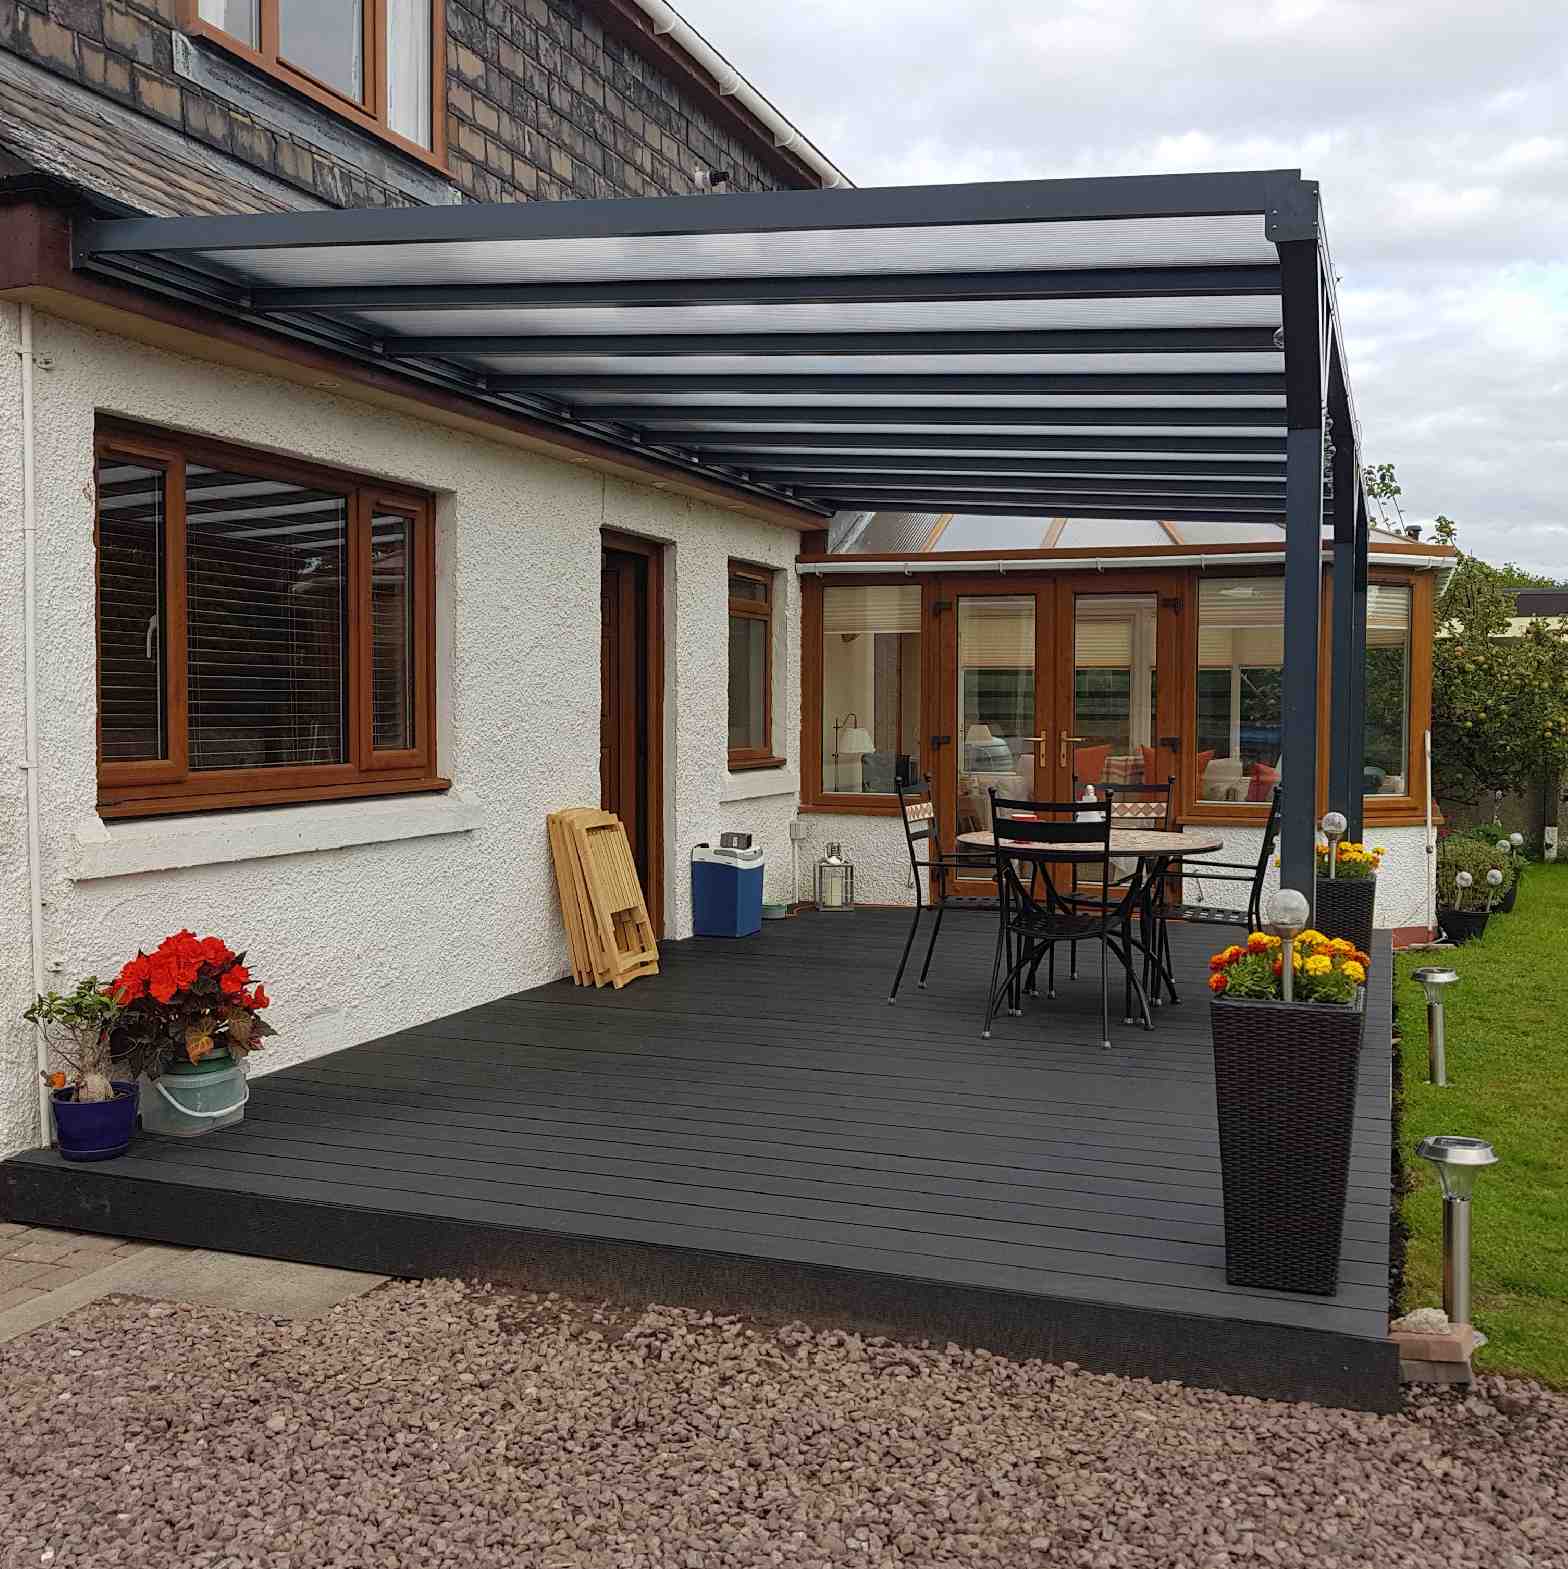 Buy Omega Verandah, Anthracite Grey, 6mm Glass Clear Plate Polycarbonate Glazing - 9.8m (W) x 2.5m (P), (5) Supporting Posts online today